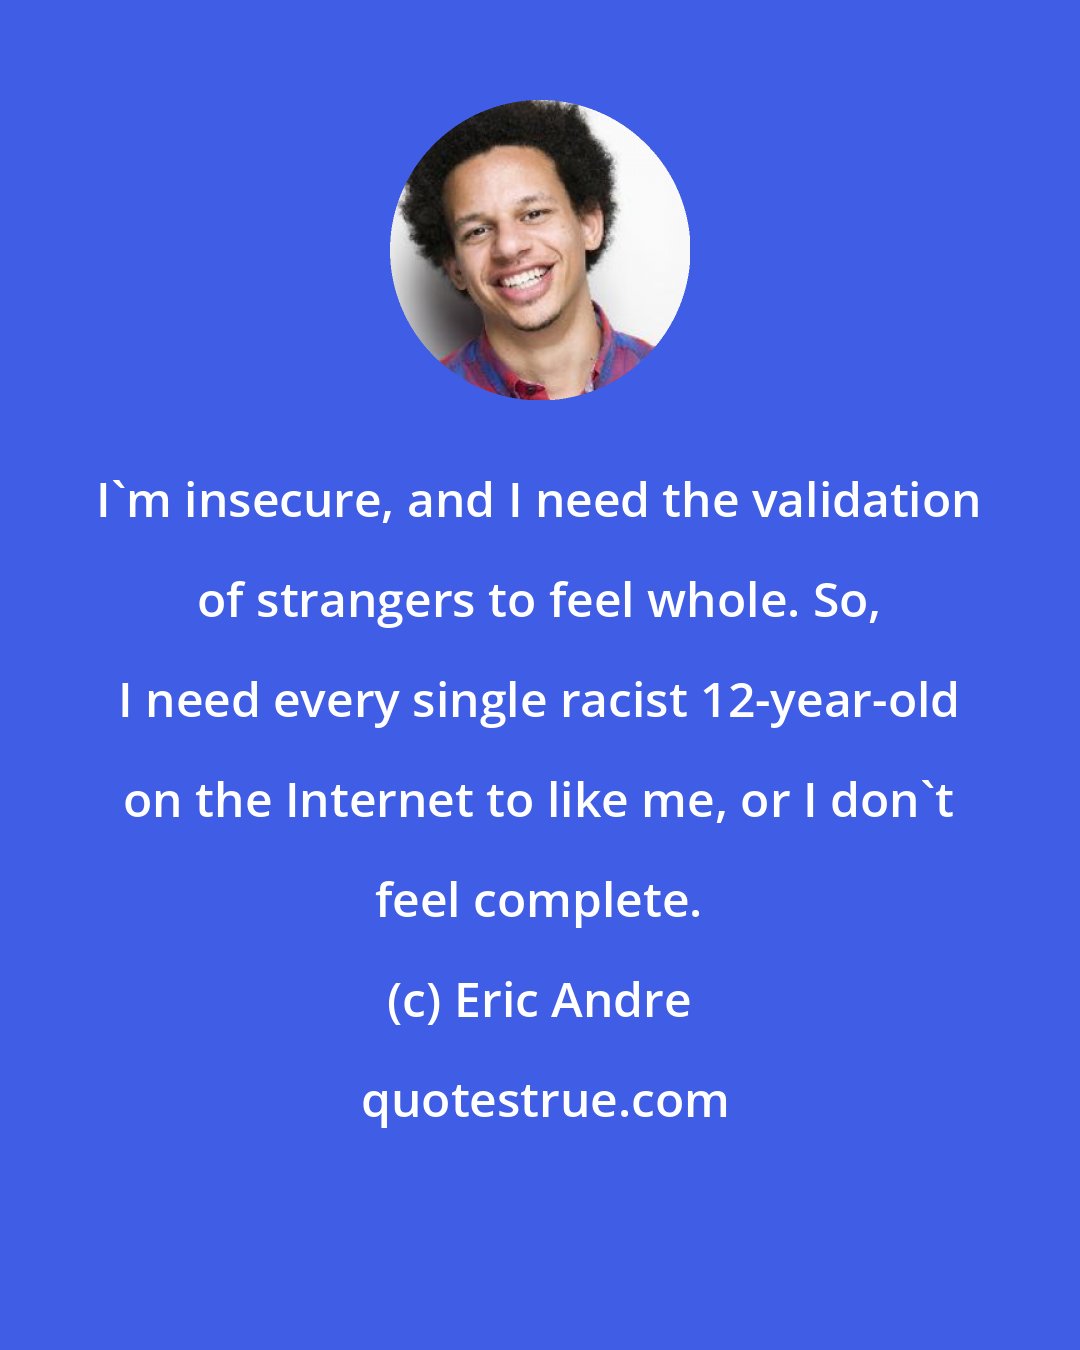 Eric Andre: I'm insecure, and I need the validation of strangers to feel whole. So, I need every single racist 12-year-old on the Internet to like me, or I don't feel complete.